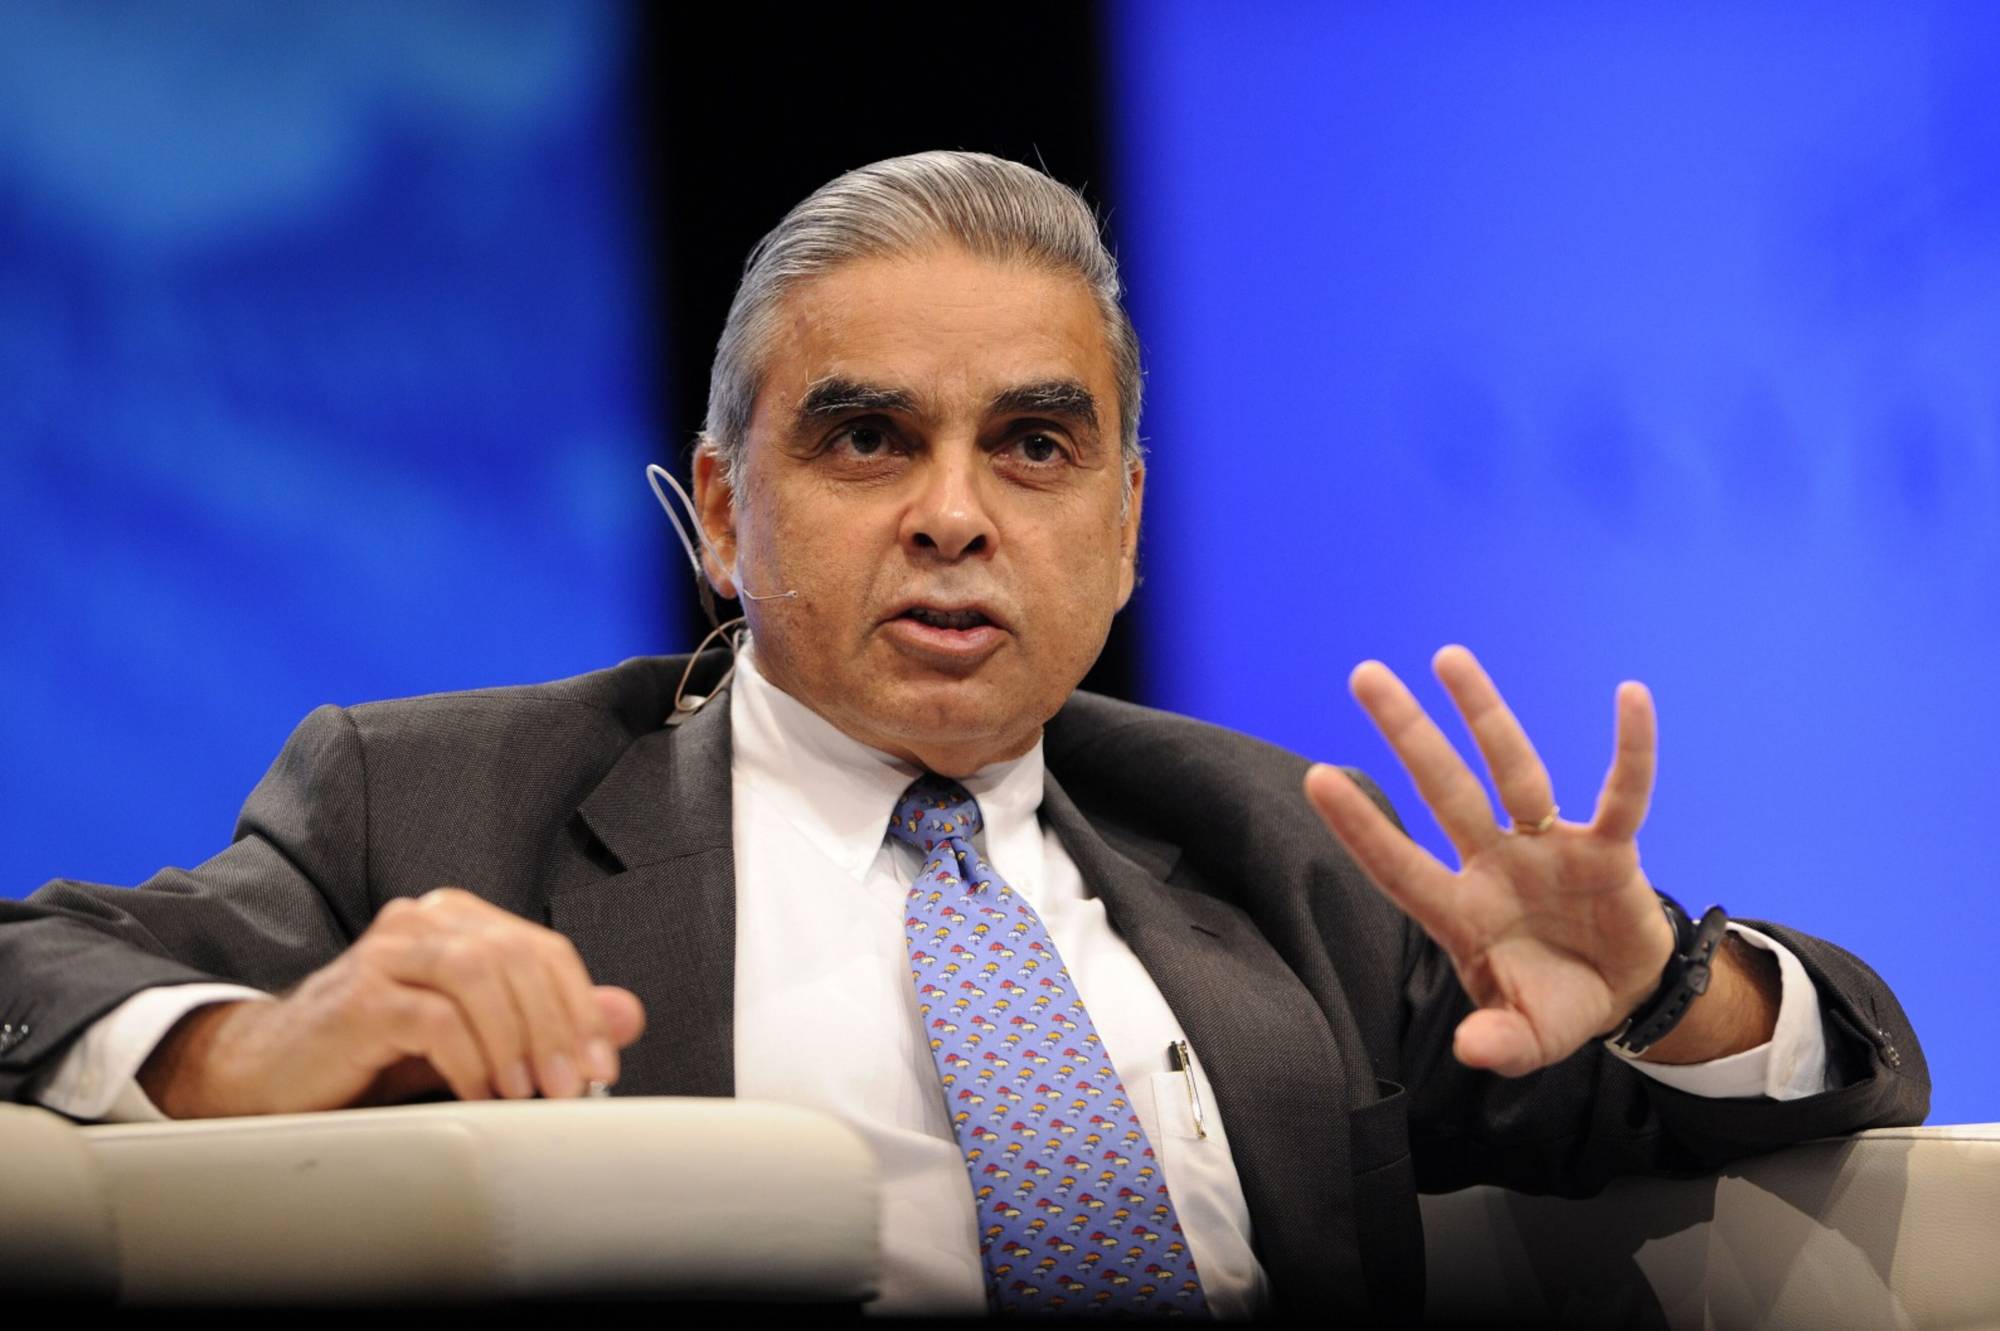 Former Singaporean diplomat Kishore Mahbubani believes Group of Seven leaders' attempts to blunt China’s growing influence in nonaligned emerging economies are unlikely to persuade most “Global South” nations to curb ties with Beijing or switch sides. | BLOOMBERG